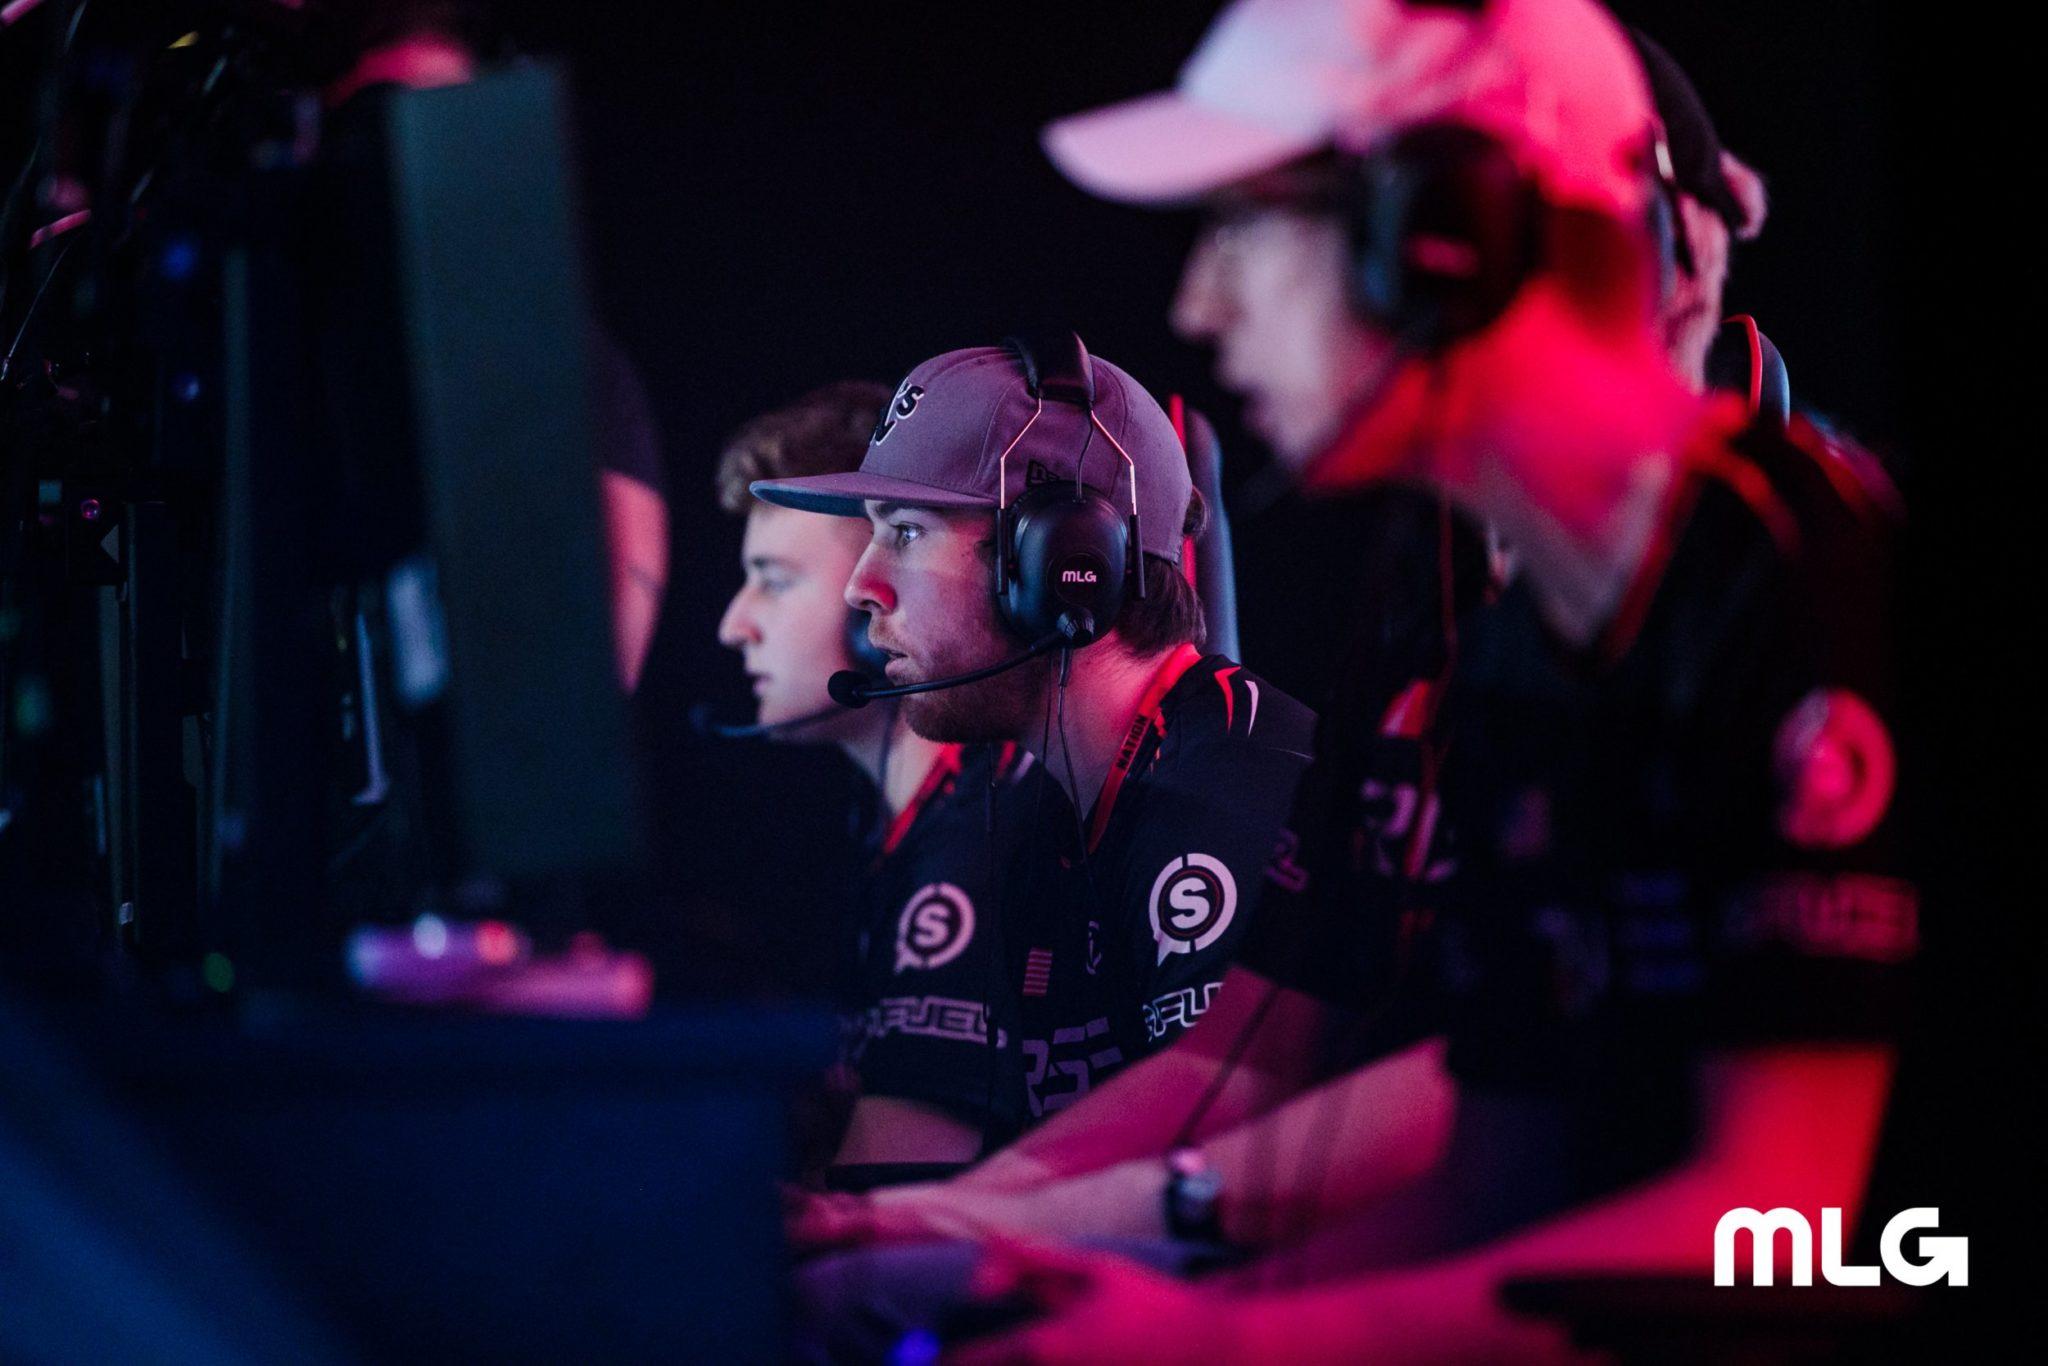 Rise Nation has had discussions about becoming a Call of Duty